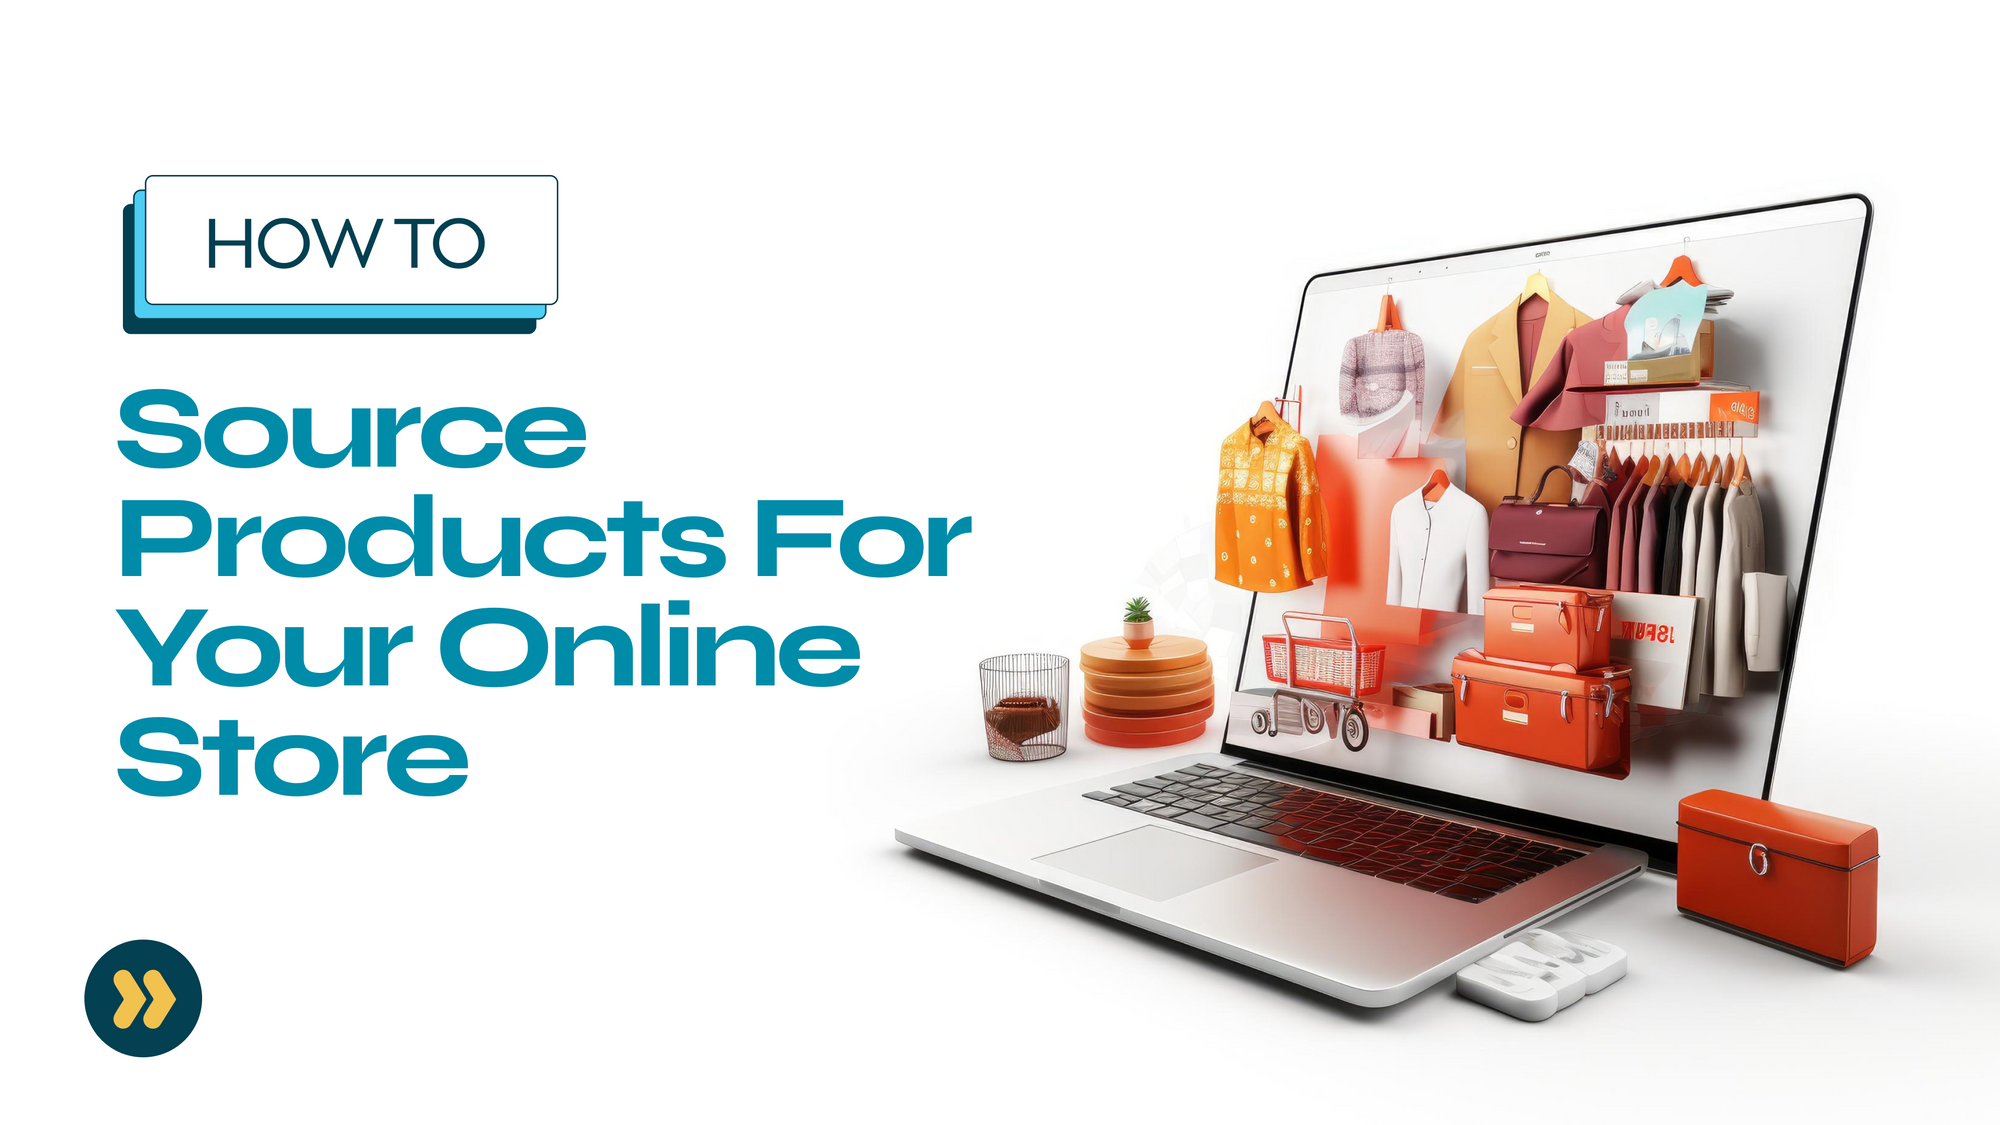 How to Source Products For Your Online Store